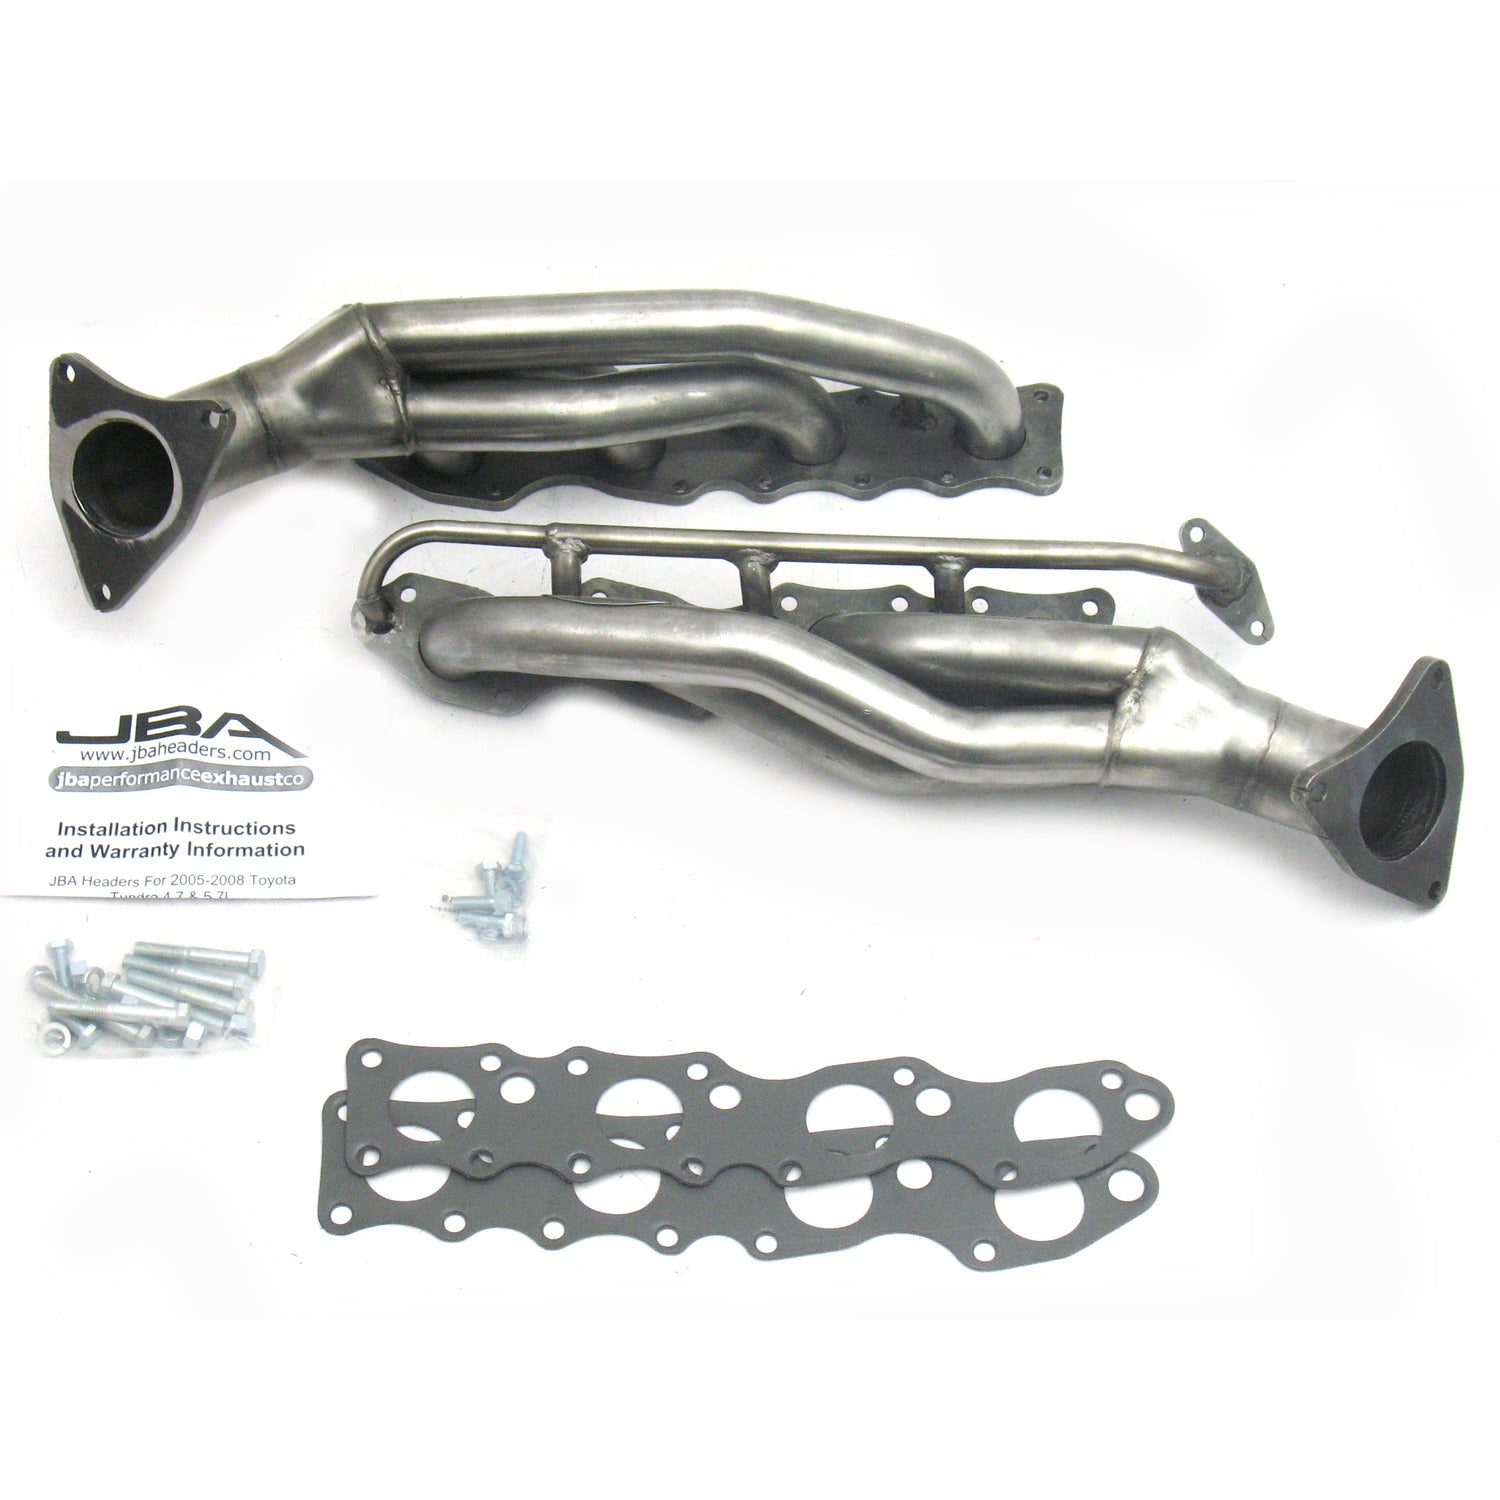 JBA Performance Exhaust 2012S 1 5/8" Header Shorty Stainless Steel 07-19 Toyota Tundra 5.7L